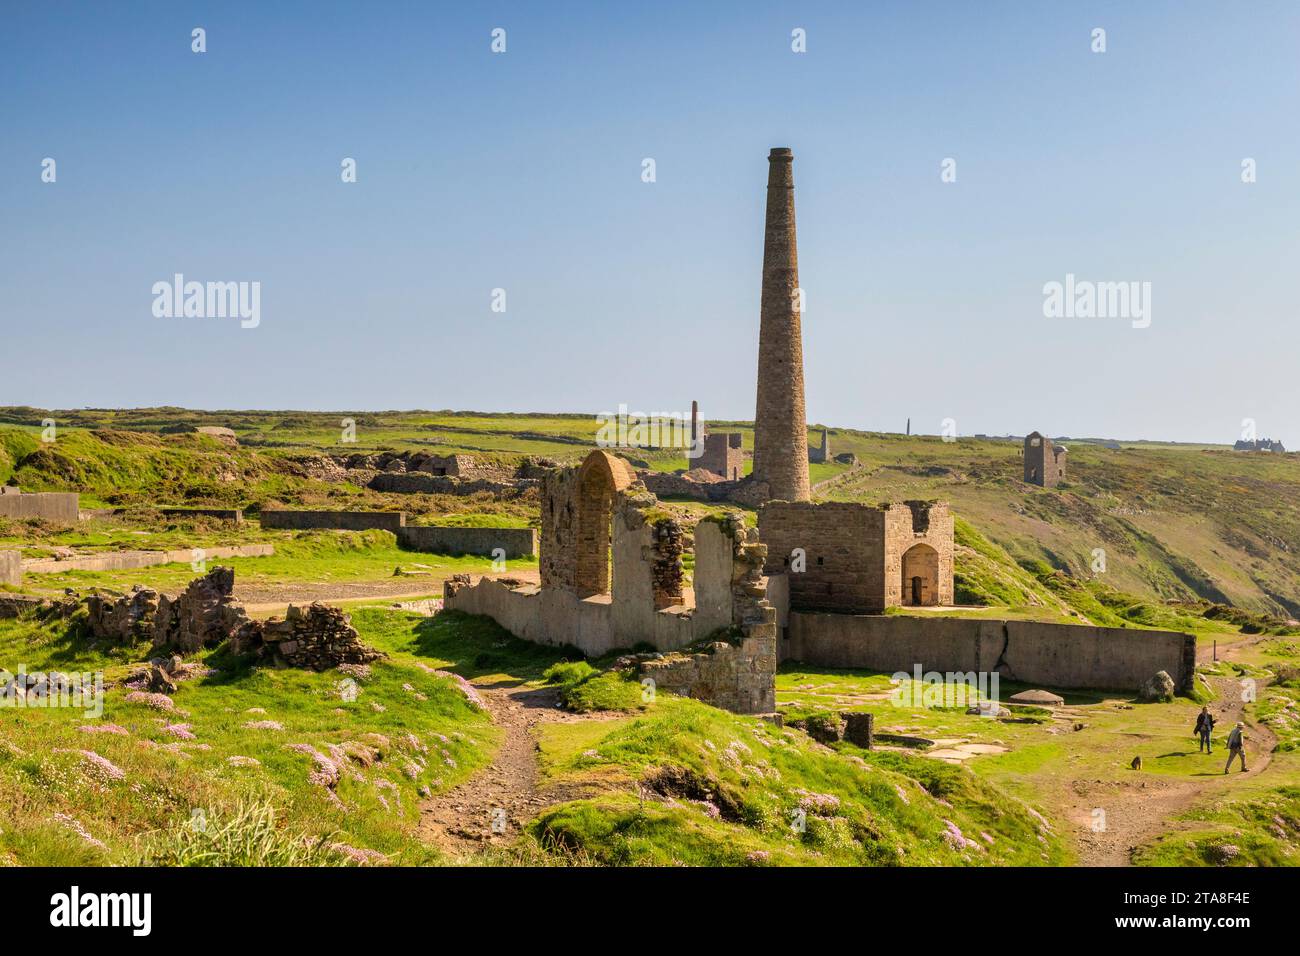 20 May 2023: Botallack, Cornwall, UK - A view over the Botallack Tin Mine, which stretches across the landscape, with several chimneys in view. Stock Photo